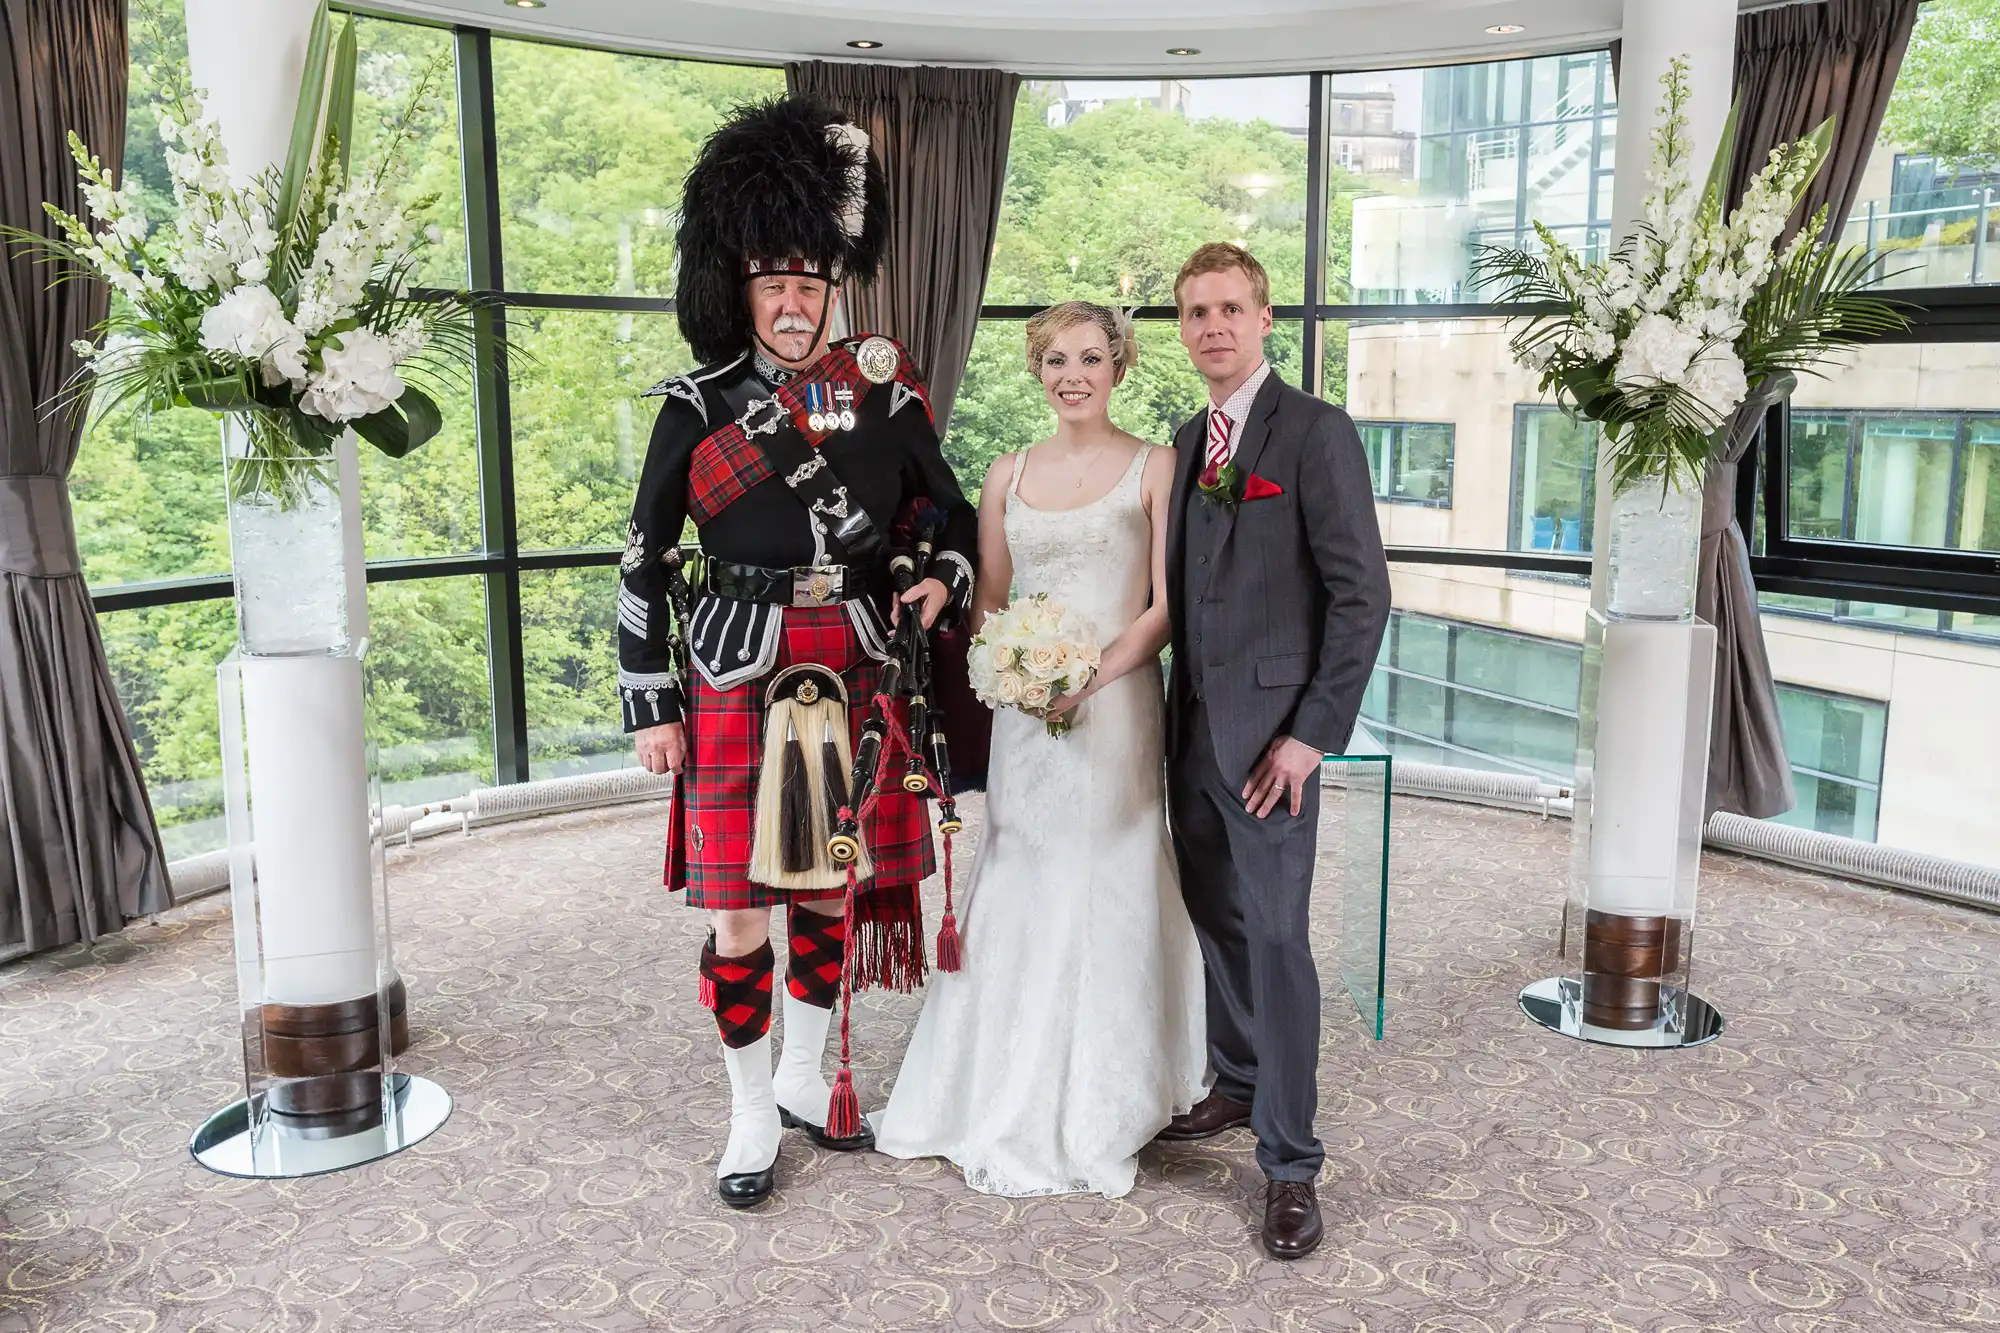 A bride and groom posing with a bagpiper in traditional scottish attire at an indoor wedding venue surrounded by windows and floral decorations.